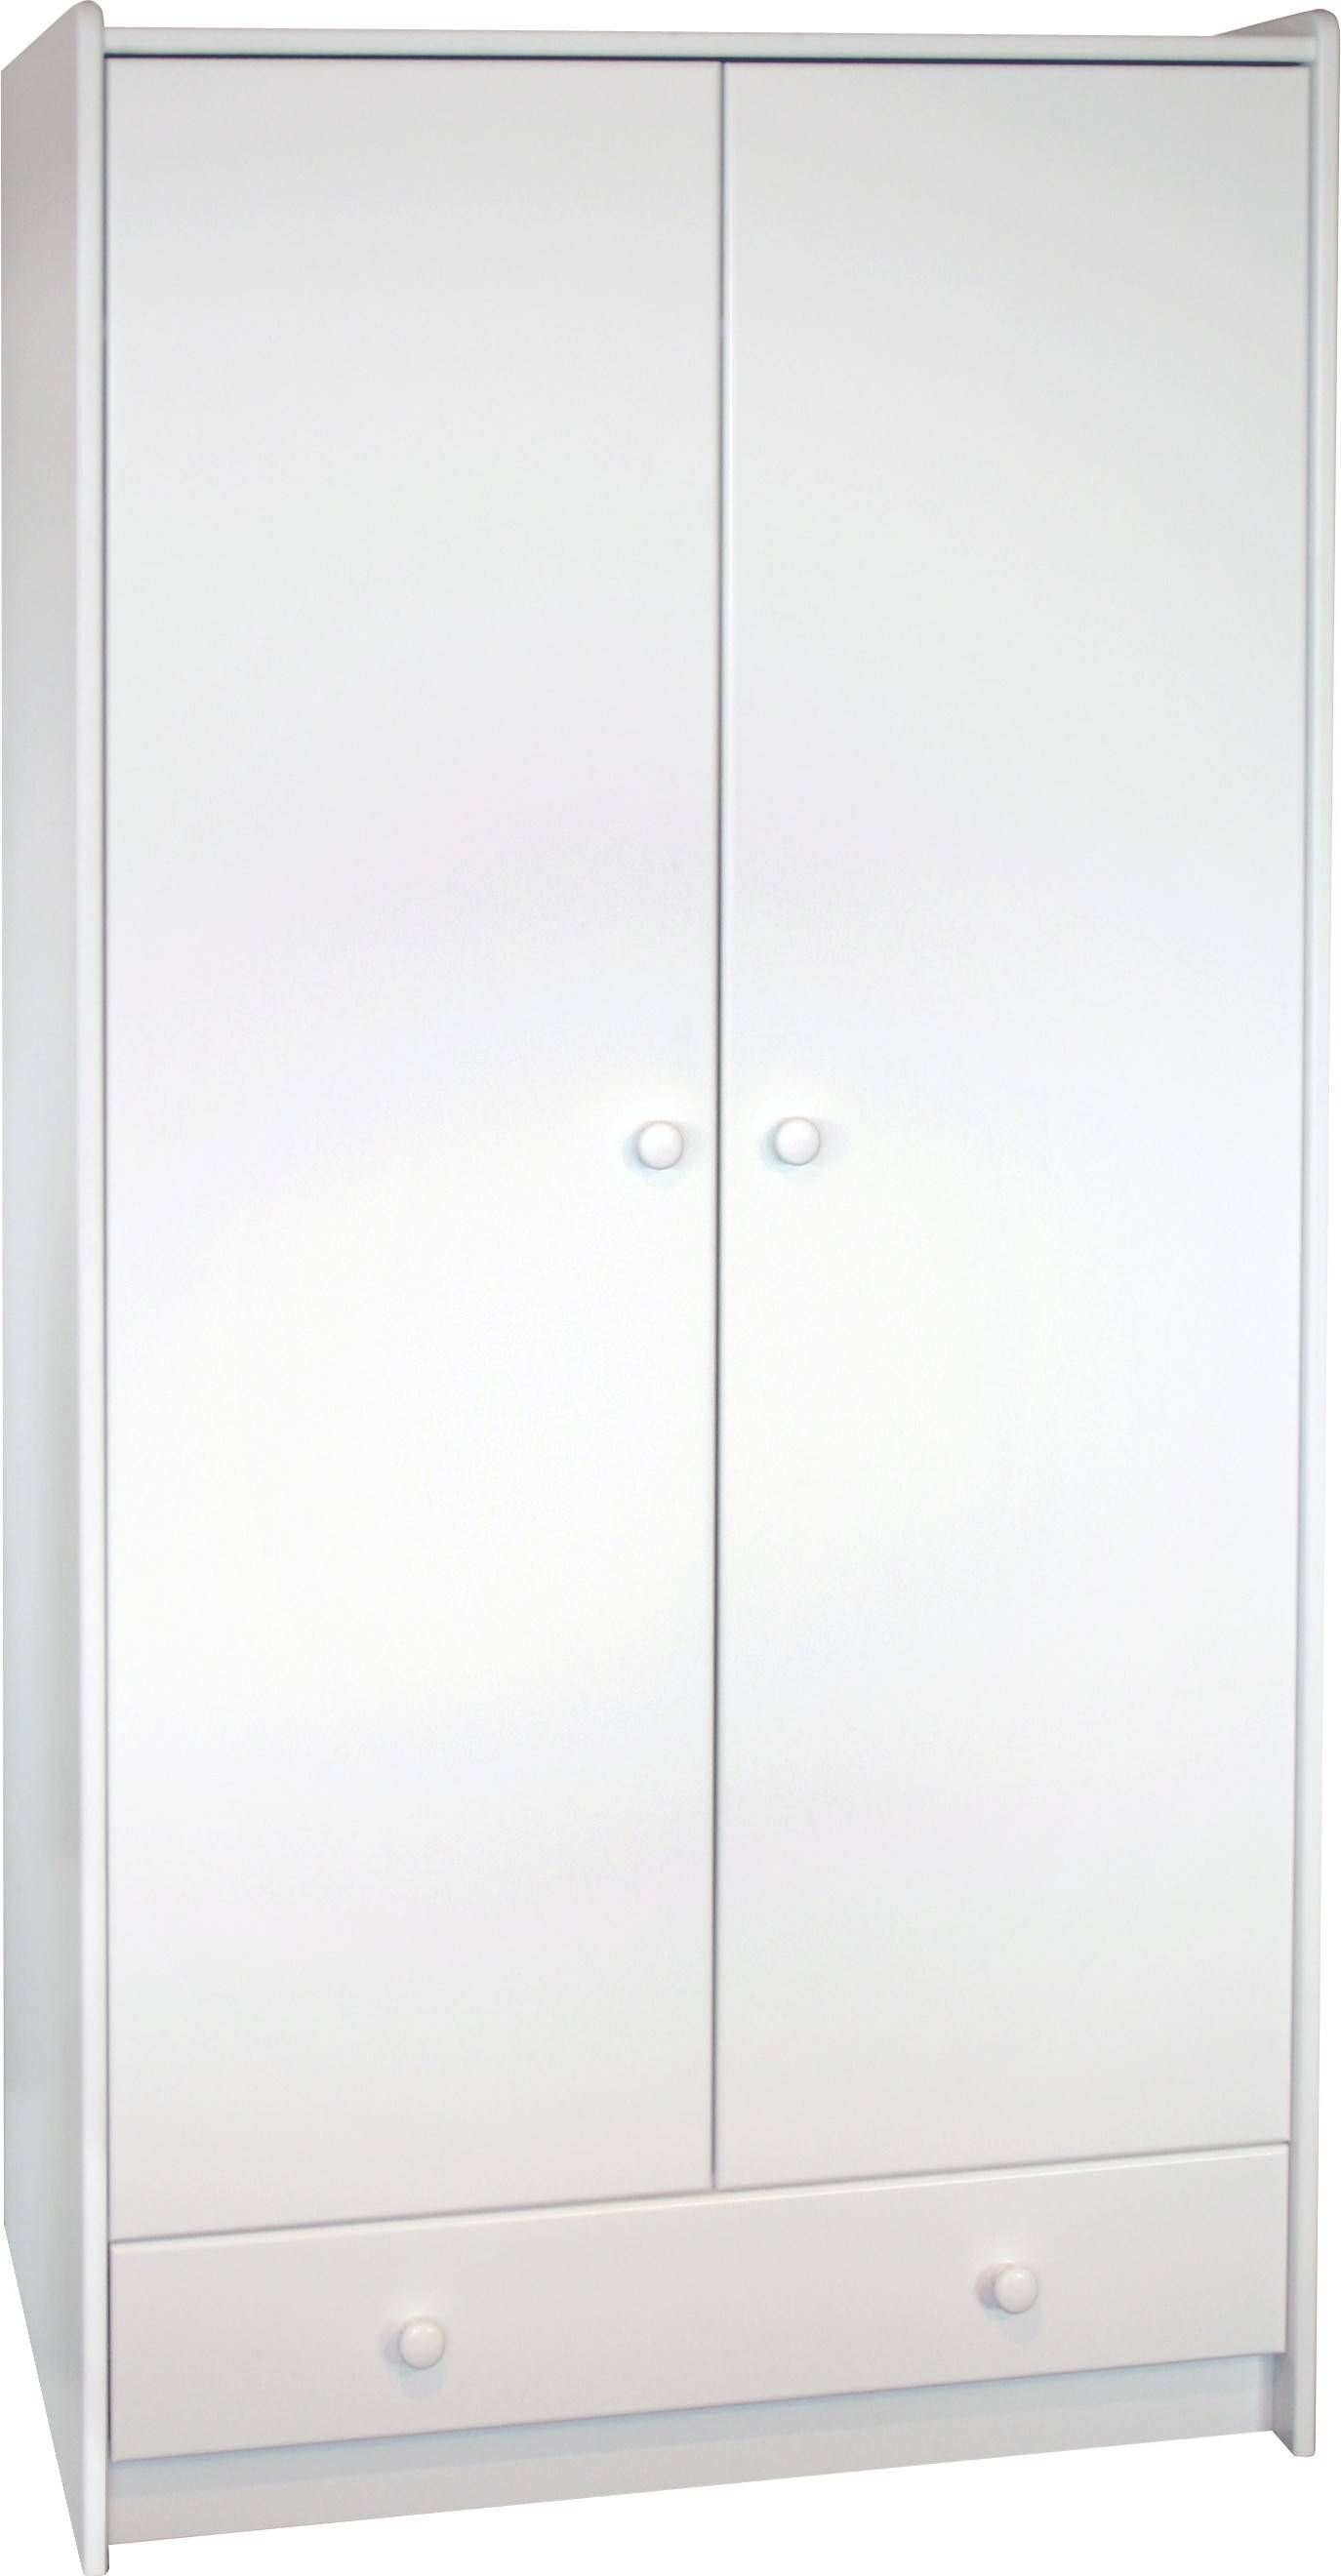 Steens For Kids Tall Wardrobe In Solid Plain White Intended For Tall White Wardrobes (View 10 of 15)